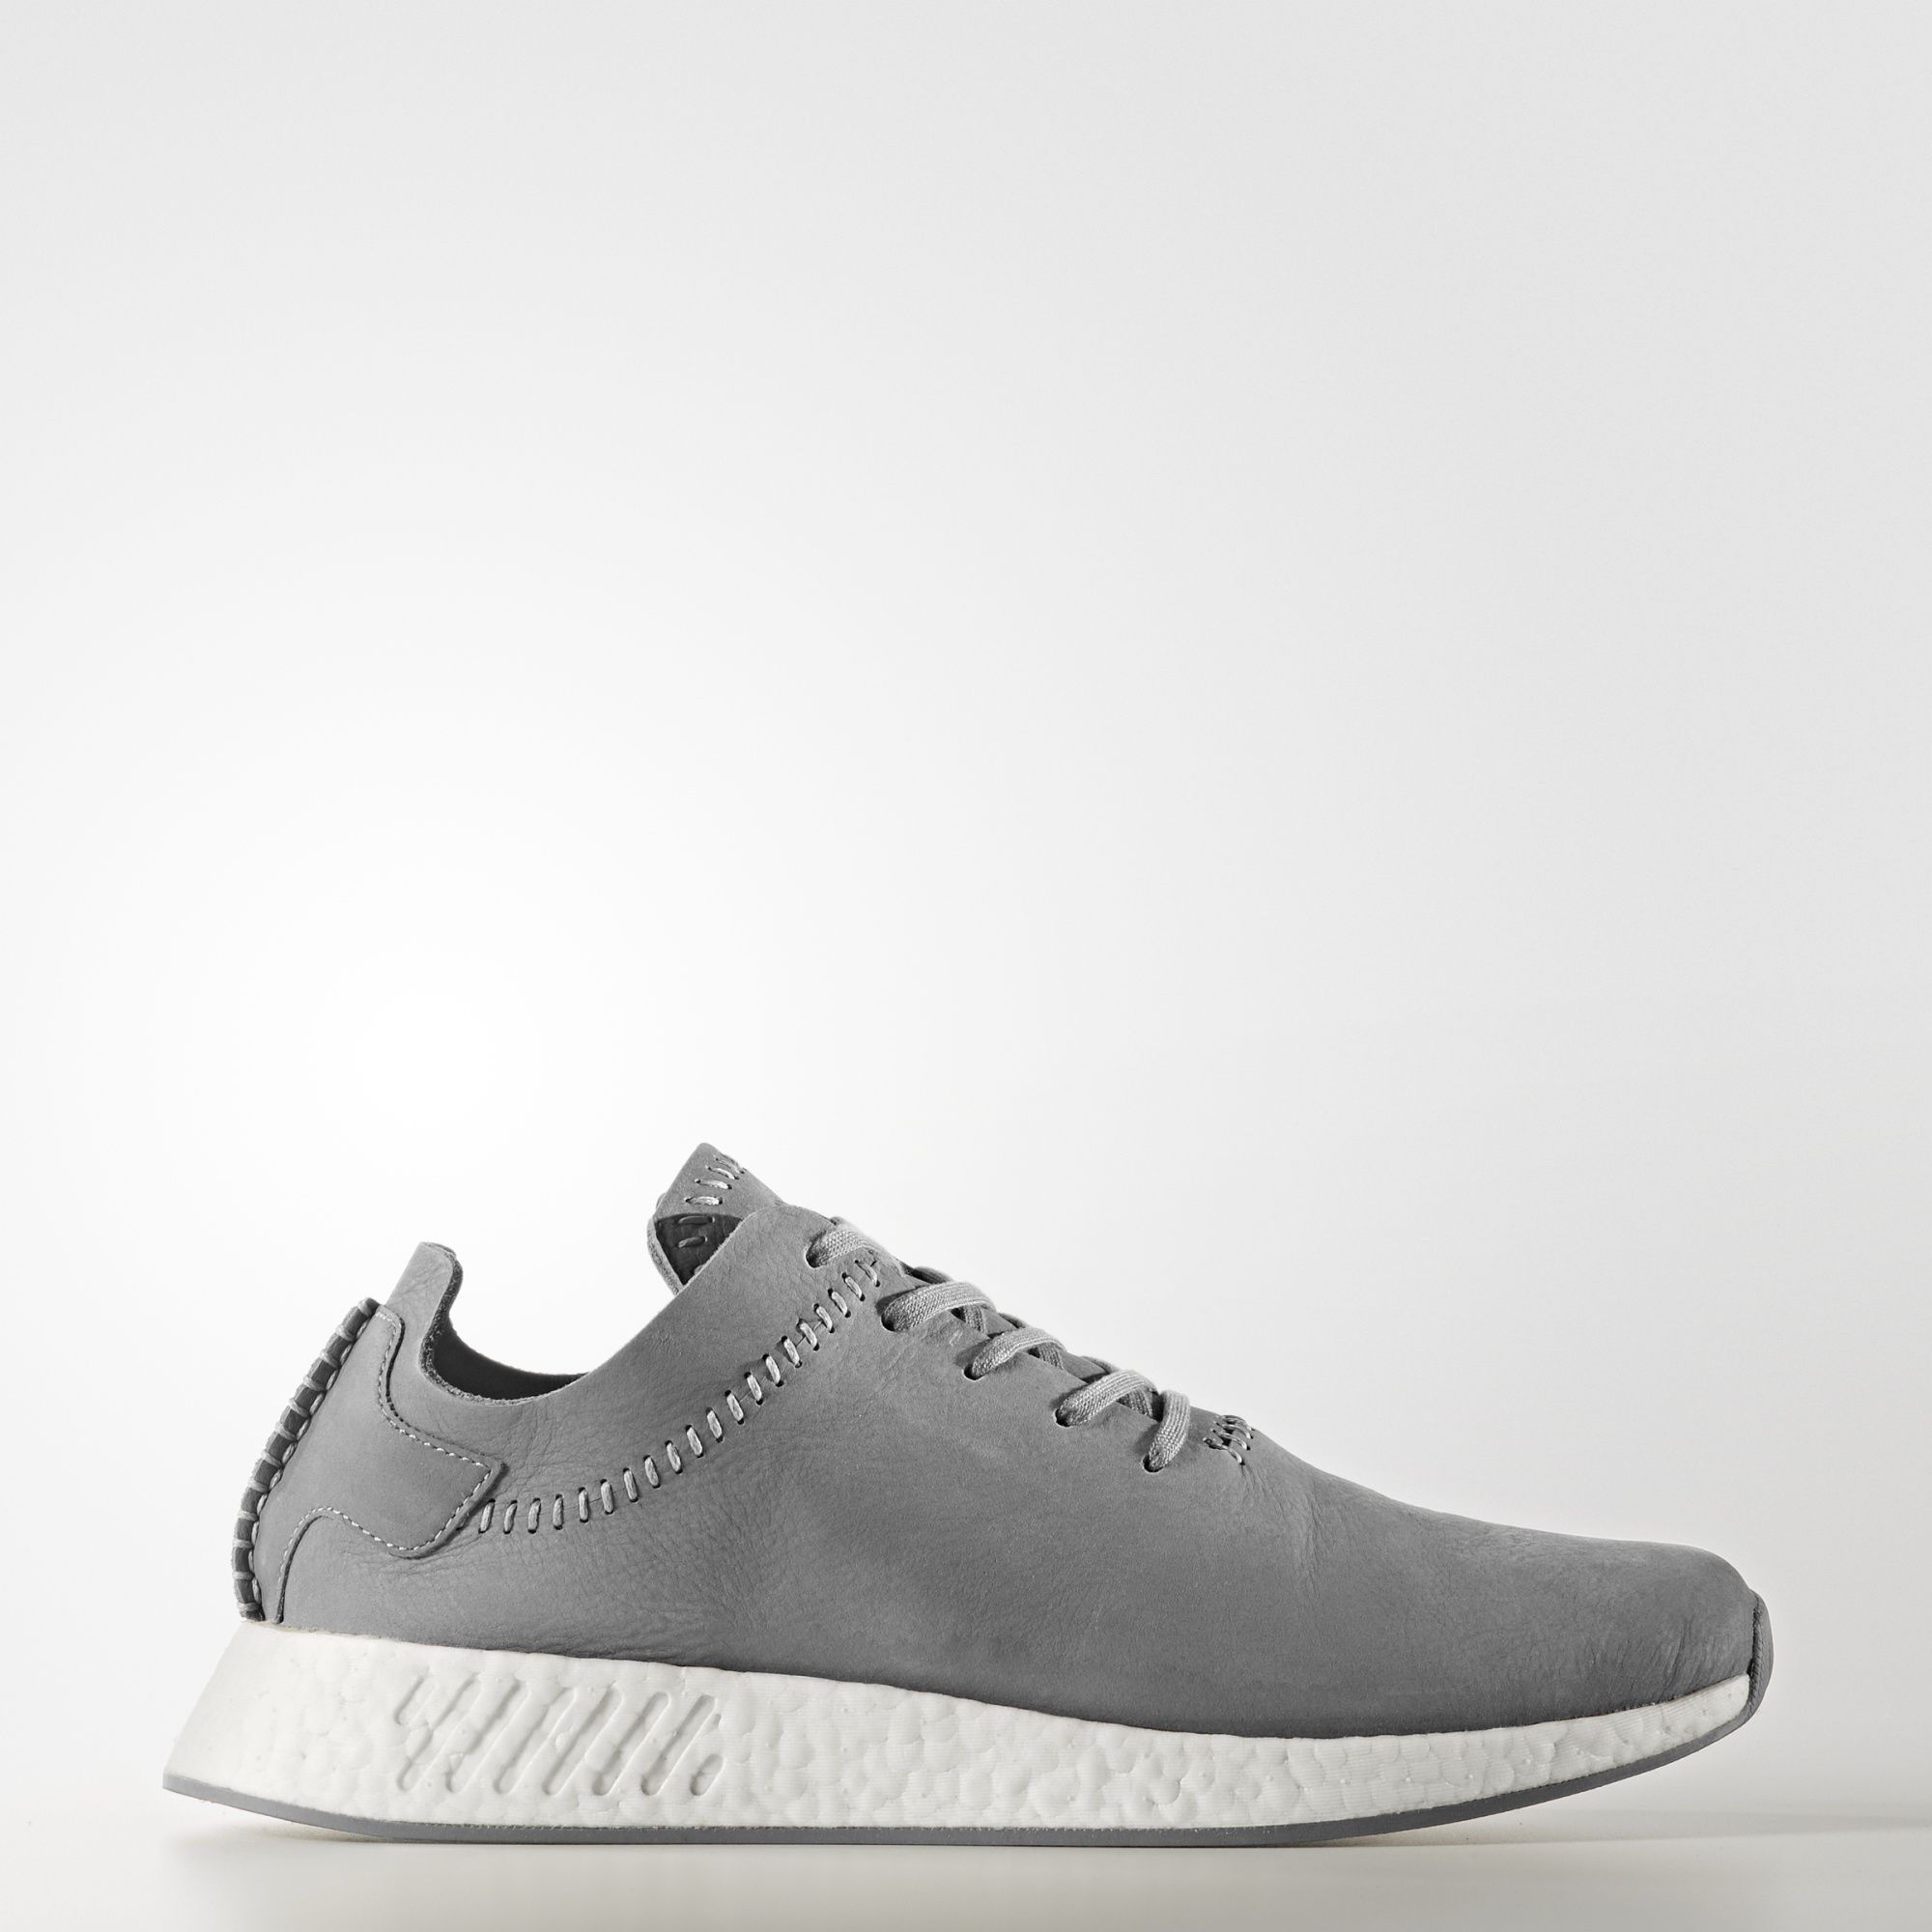 Adidas Originals by Wings + Horns 
NMD_R2 Boost
Dark Grey / Off-White